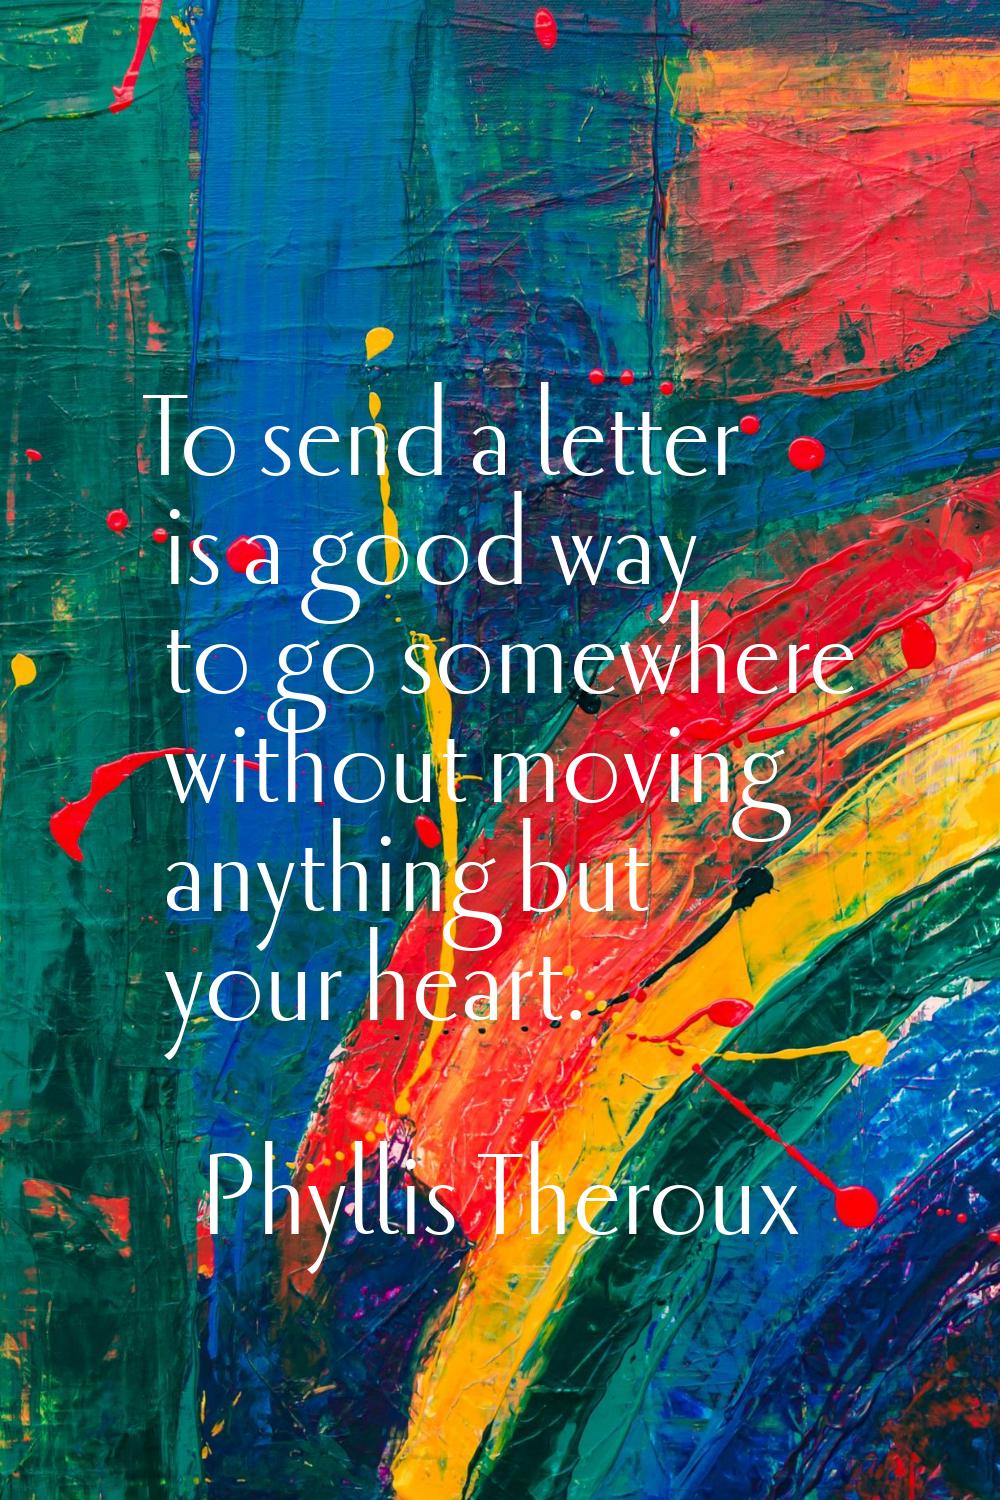 To send a letter is a good way to go somewhere without moving anything but your heart.